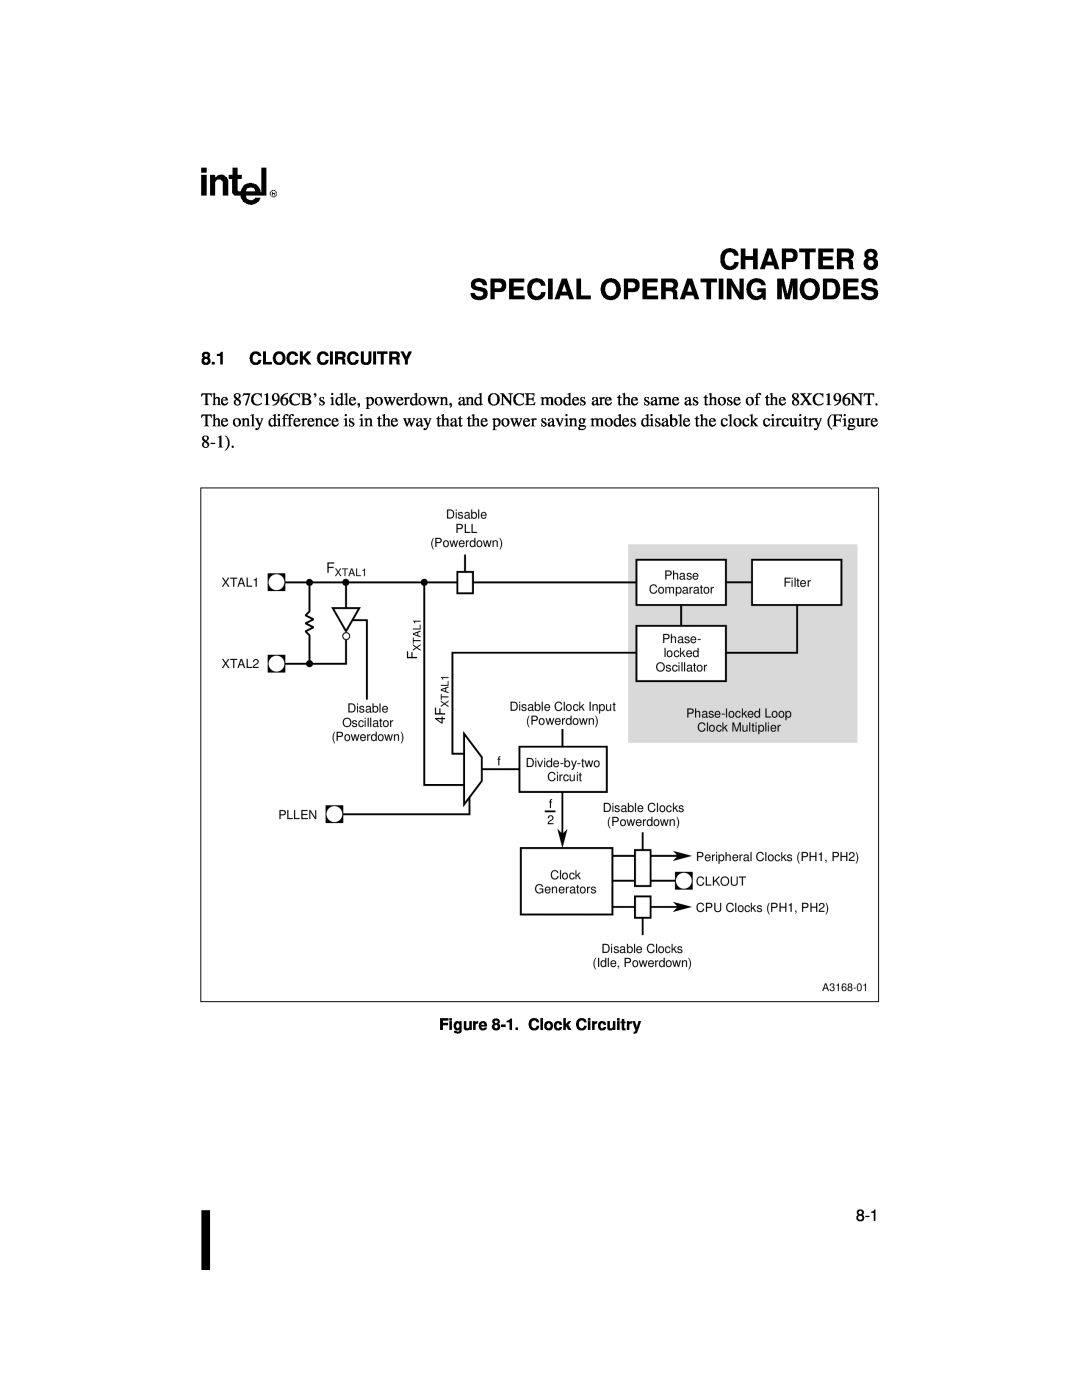 Intel 87C196CB, 8XC196NT user manual Chapter Special Operating Modes, 1. Clock Circuitry 